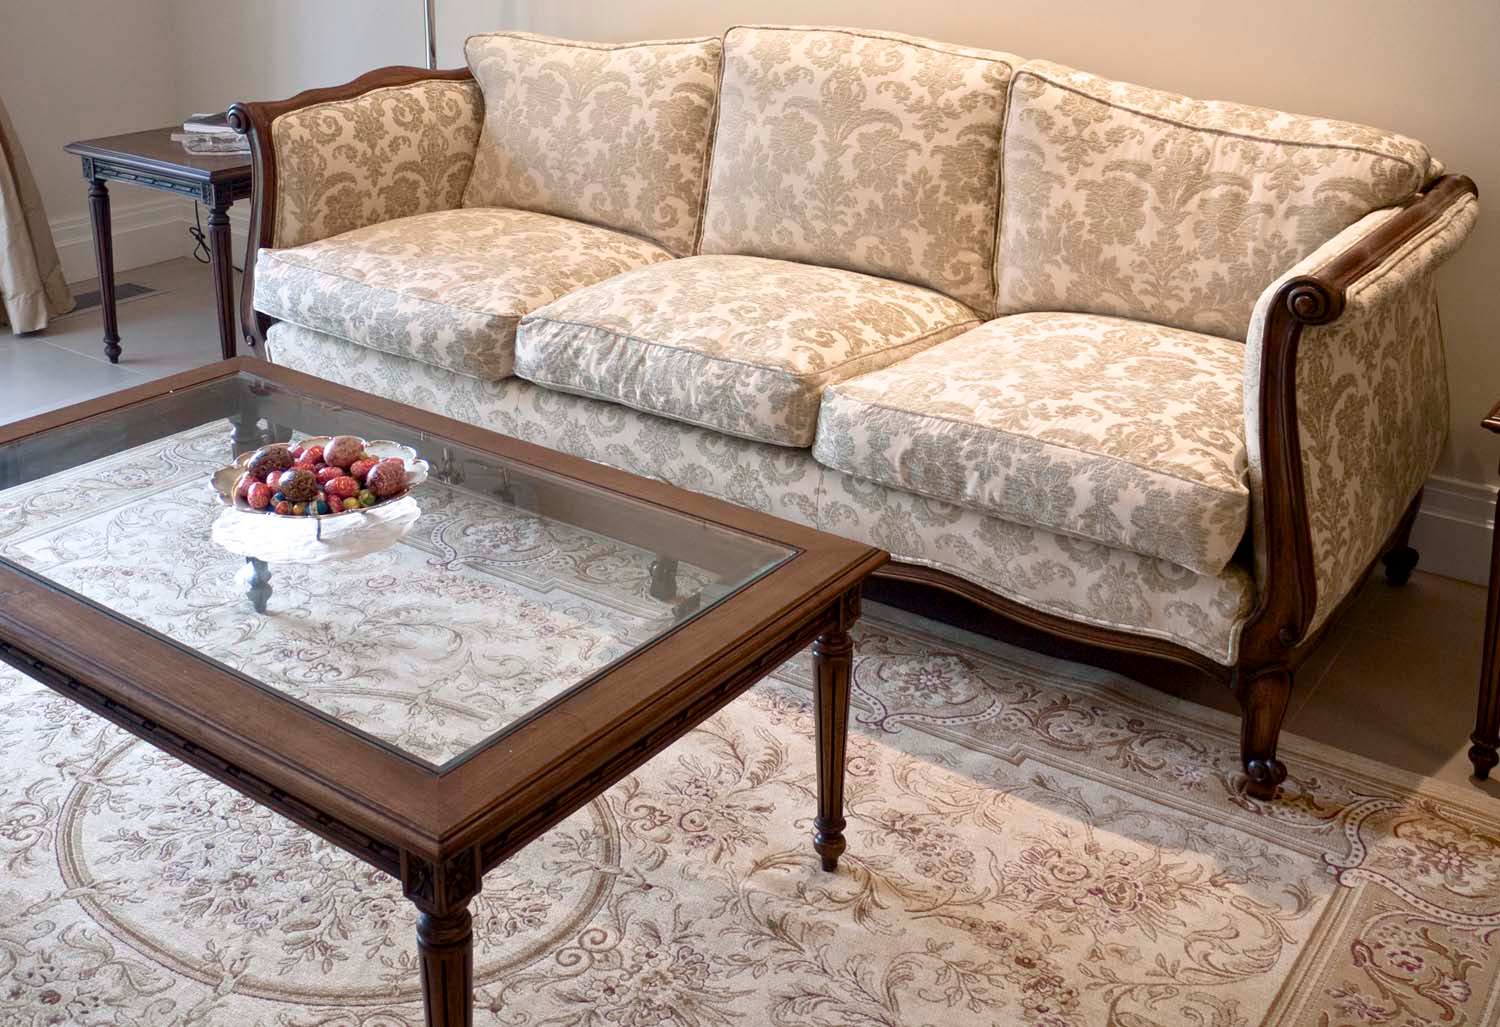 2 French louis daybed in cream demask with coffee table and matching rug